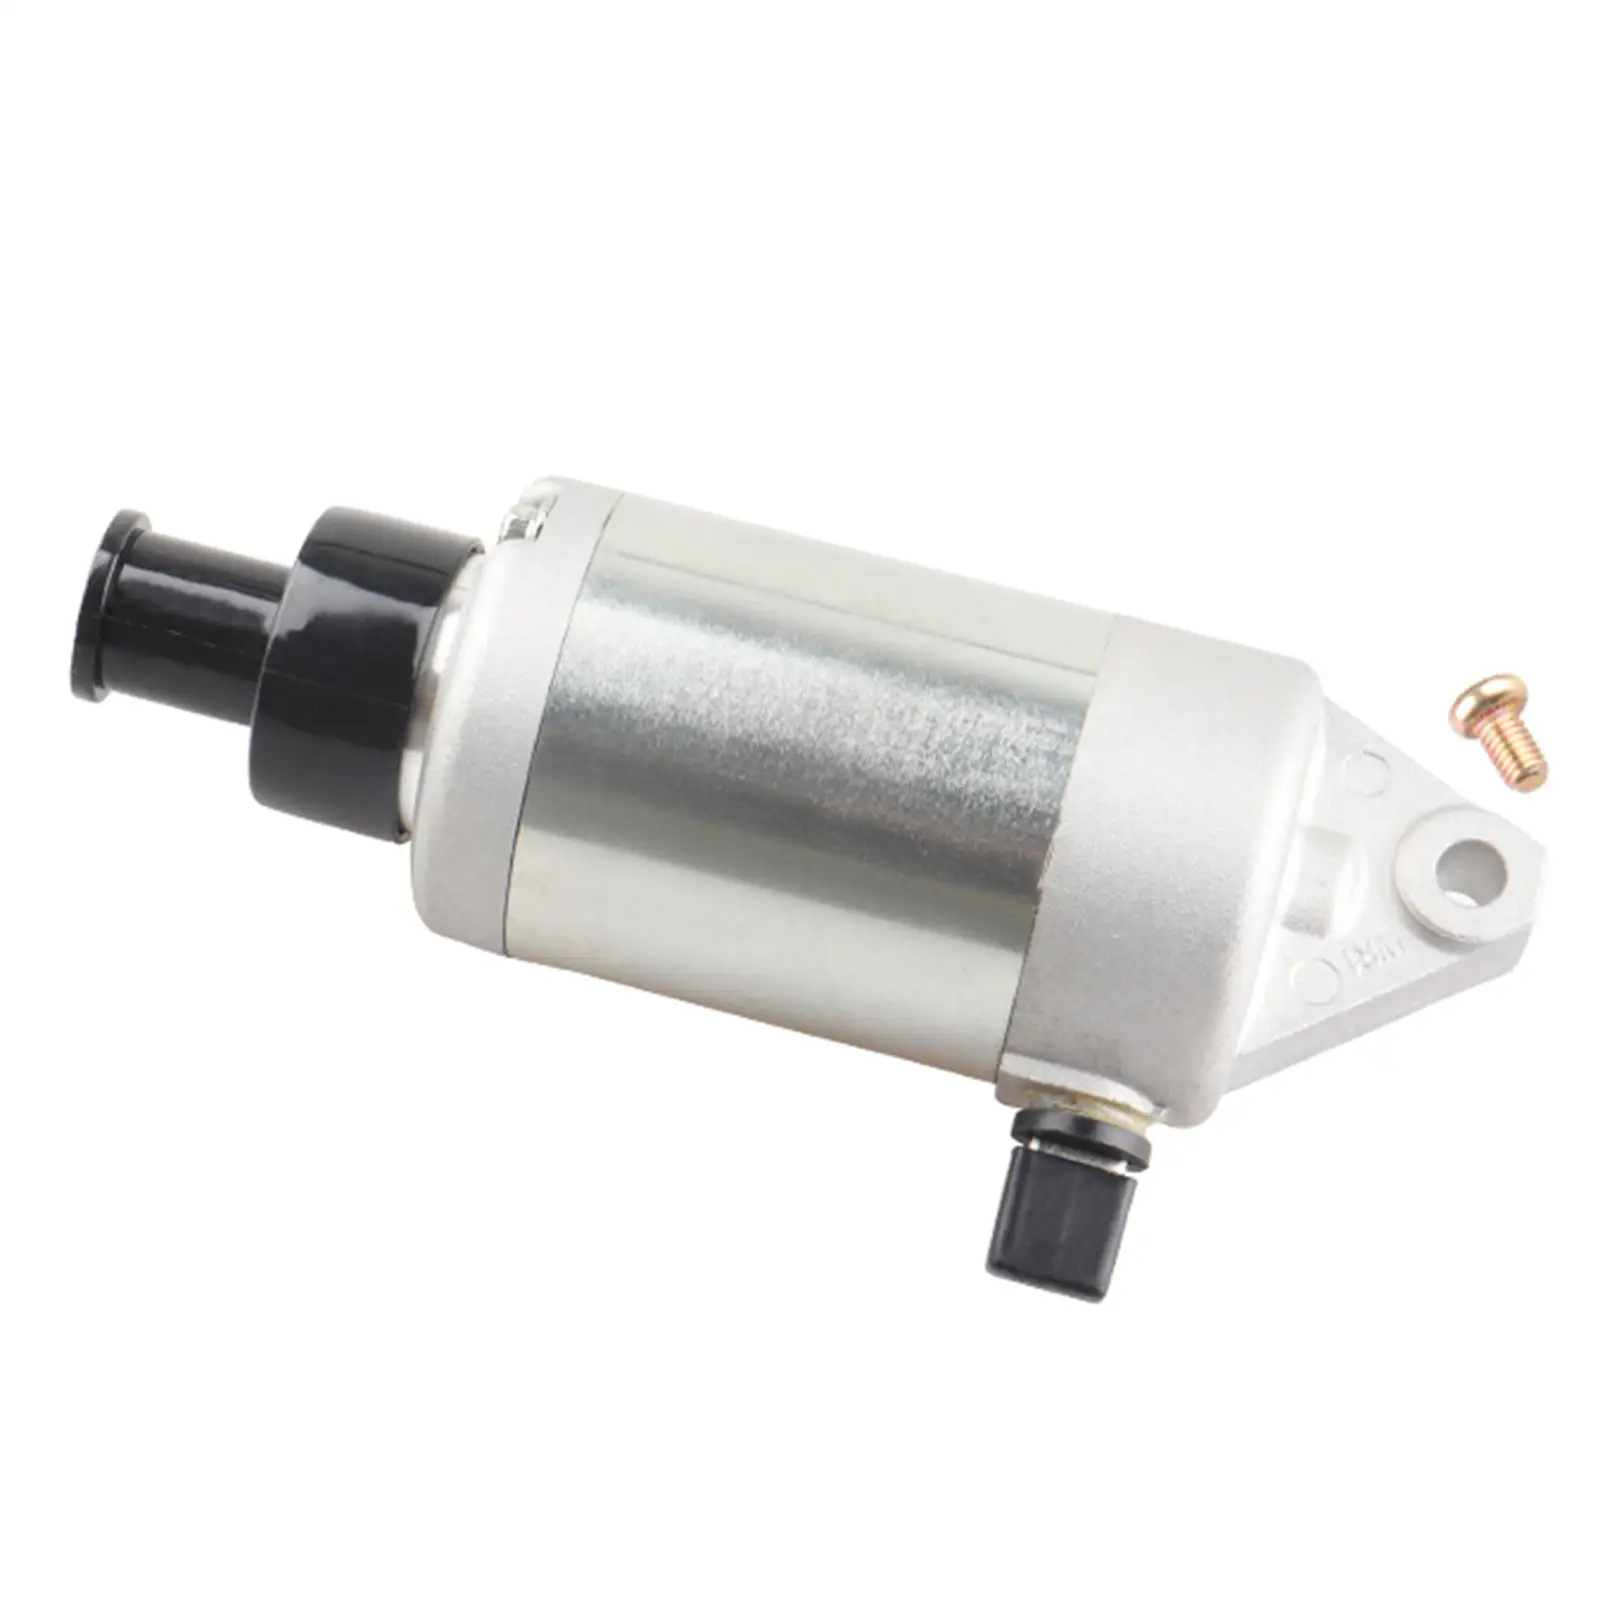 Motorcycle Starter Motor 2GB-81890-00 Easy Installation Replace Parts High Performance for Yamaha Yz250FX Yz250F 2015-2019